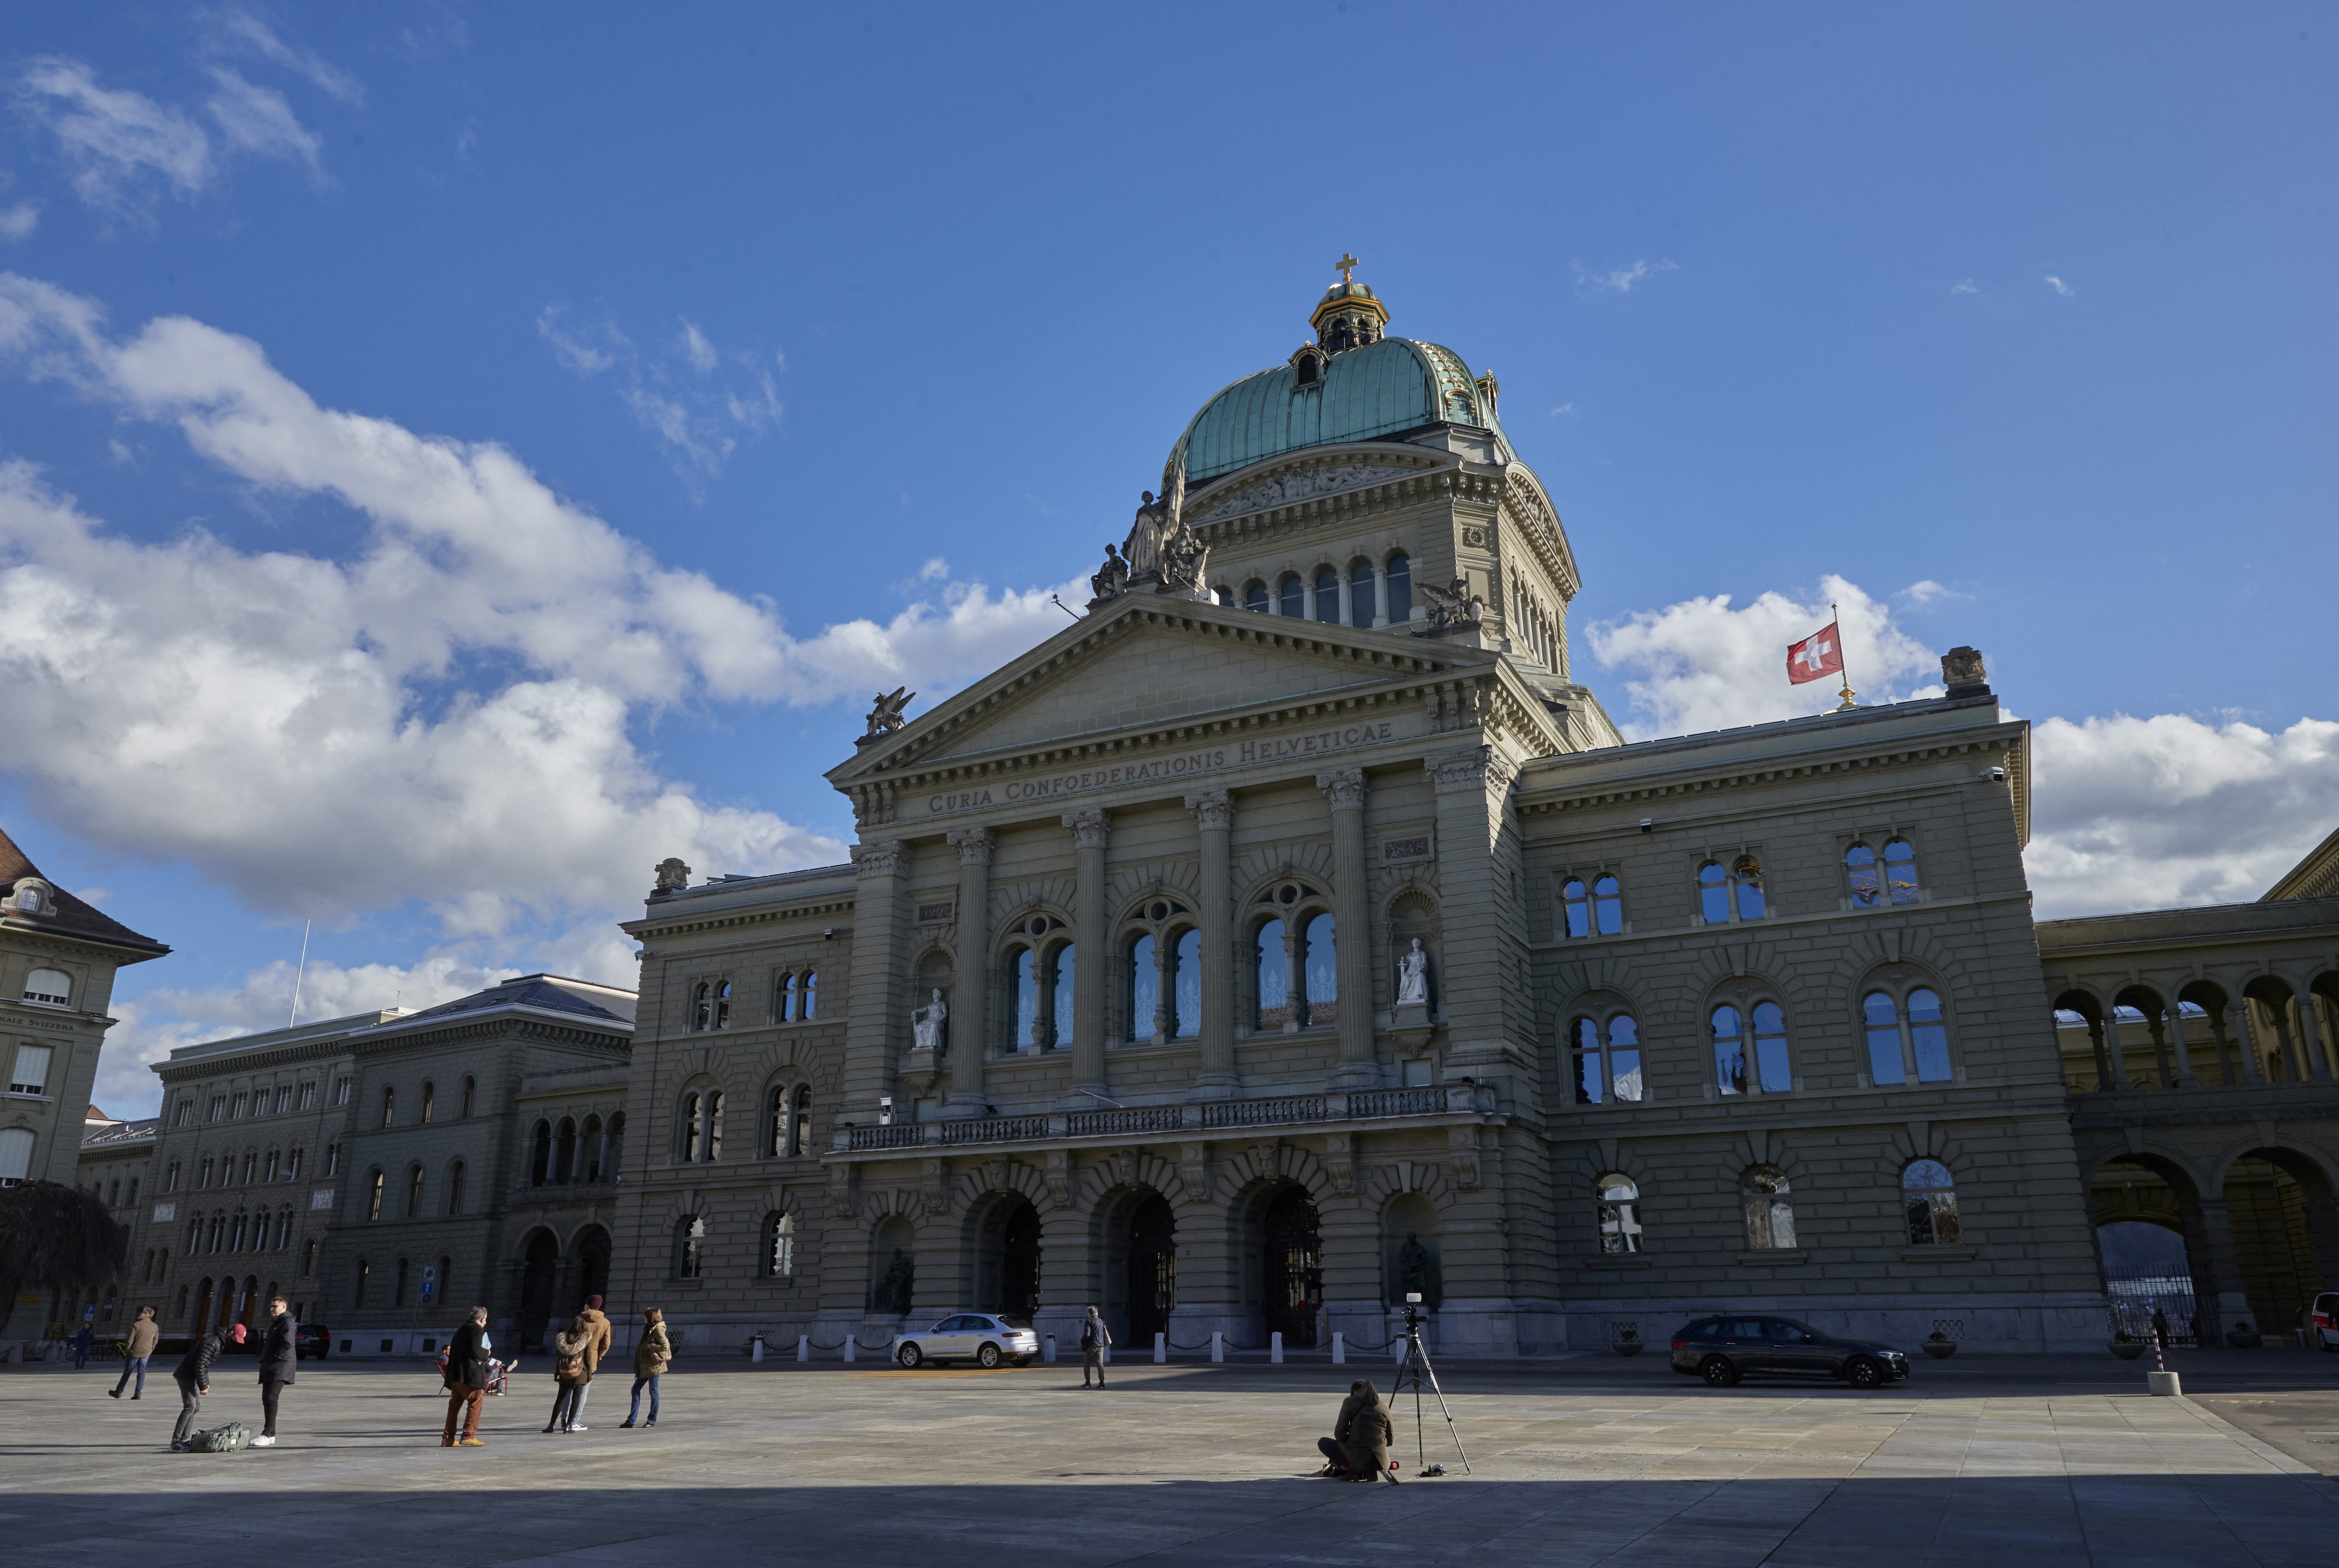 The Swiss Parliament Building